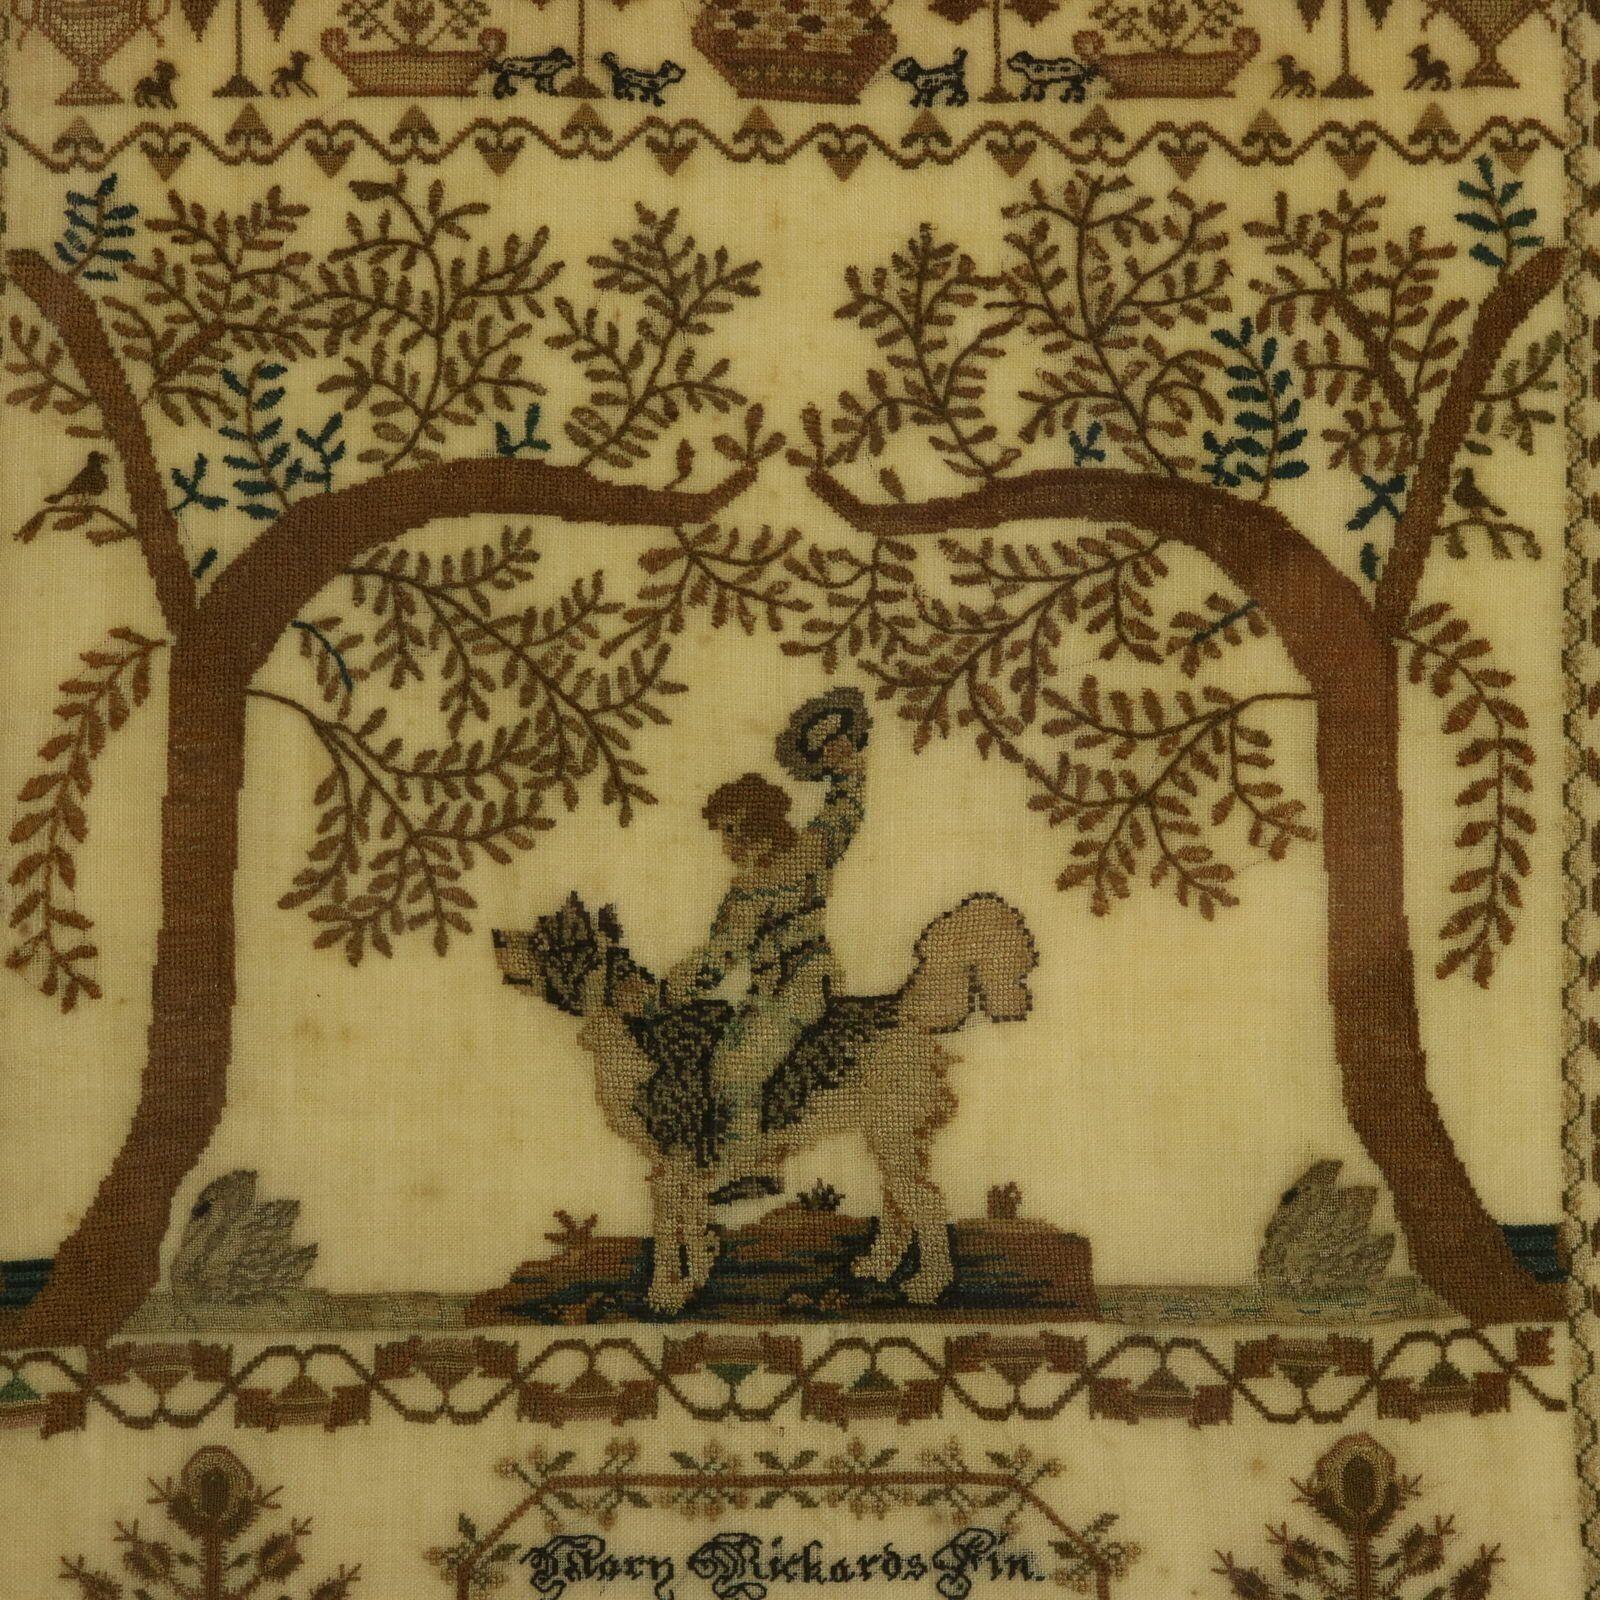 English Antique Sampler, 1824, by Mary Richards aged 13